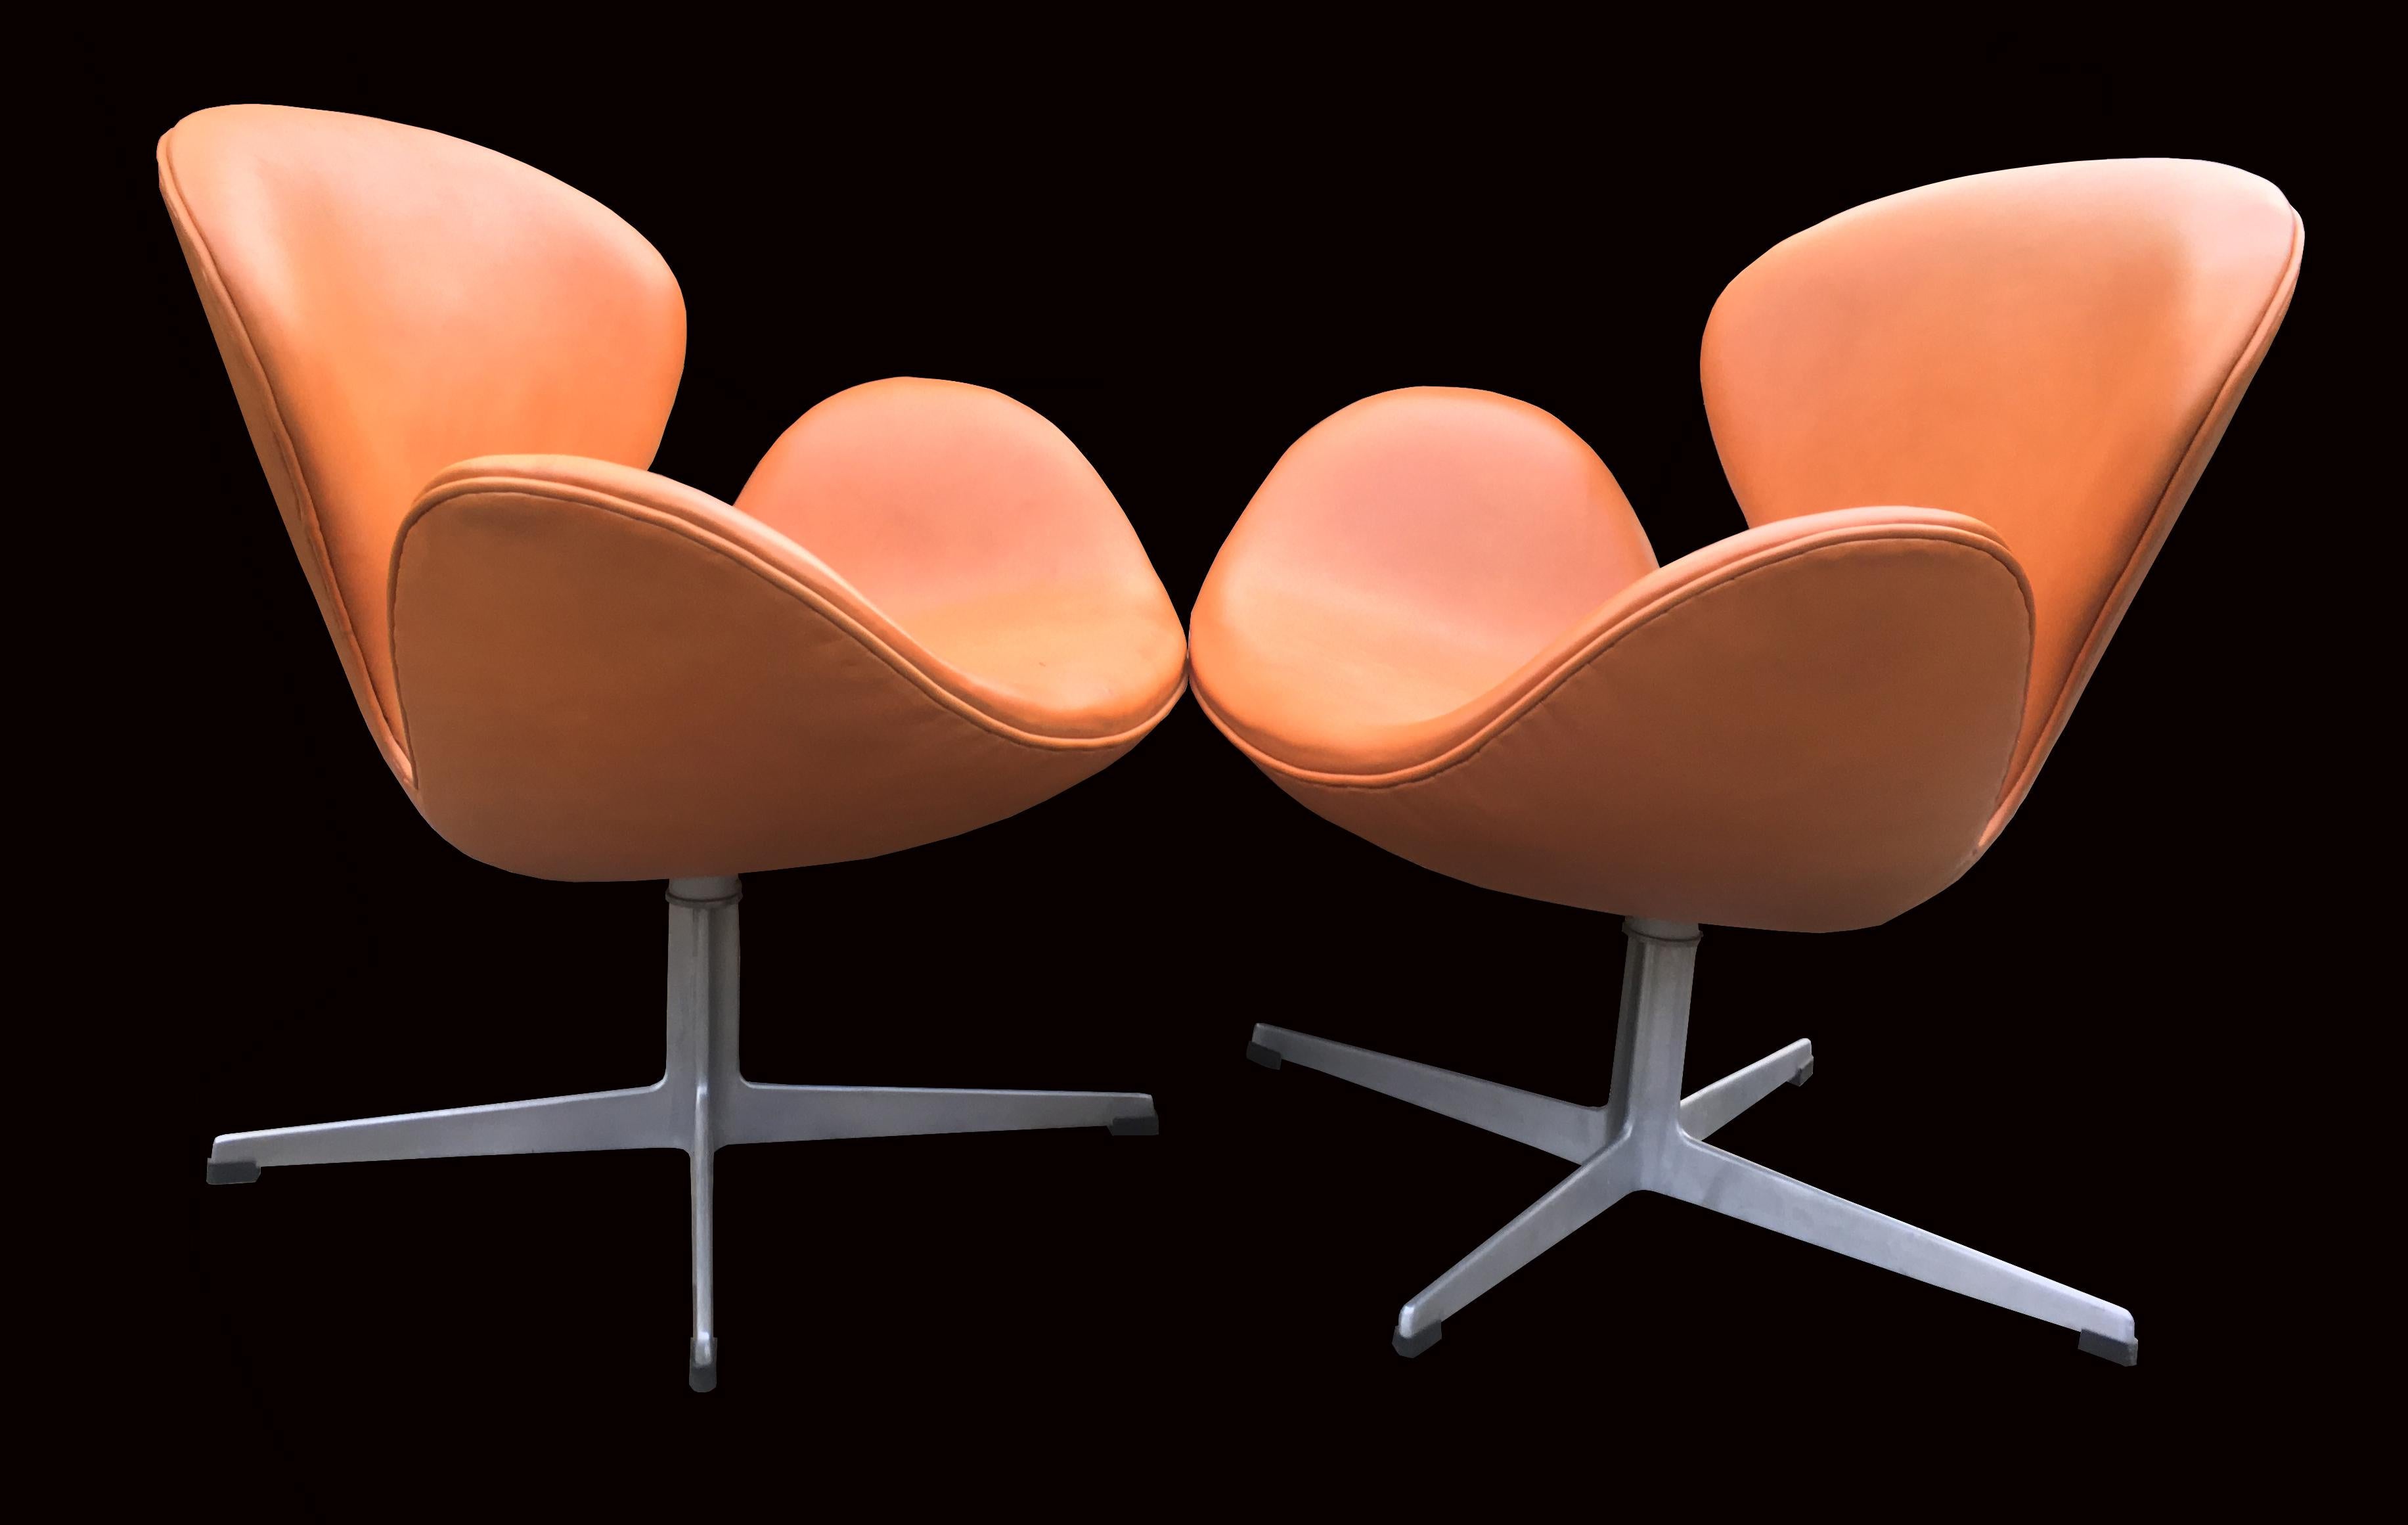 20th Century Rare Pair of Cognac Leather Swan Chairs by Arne Jacobsen for Fritz Hansen